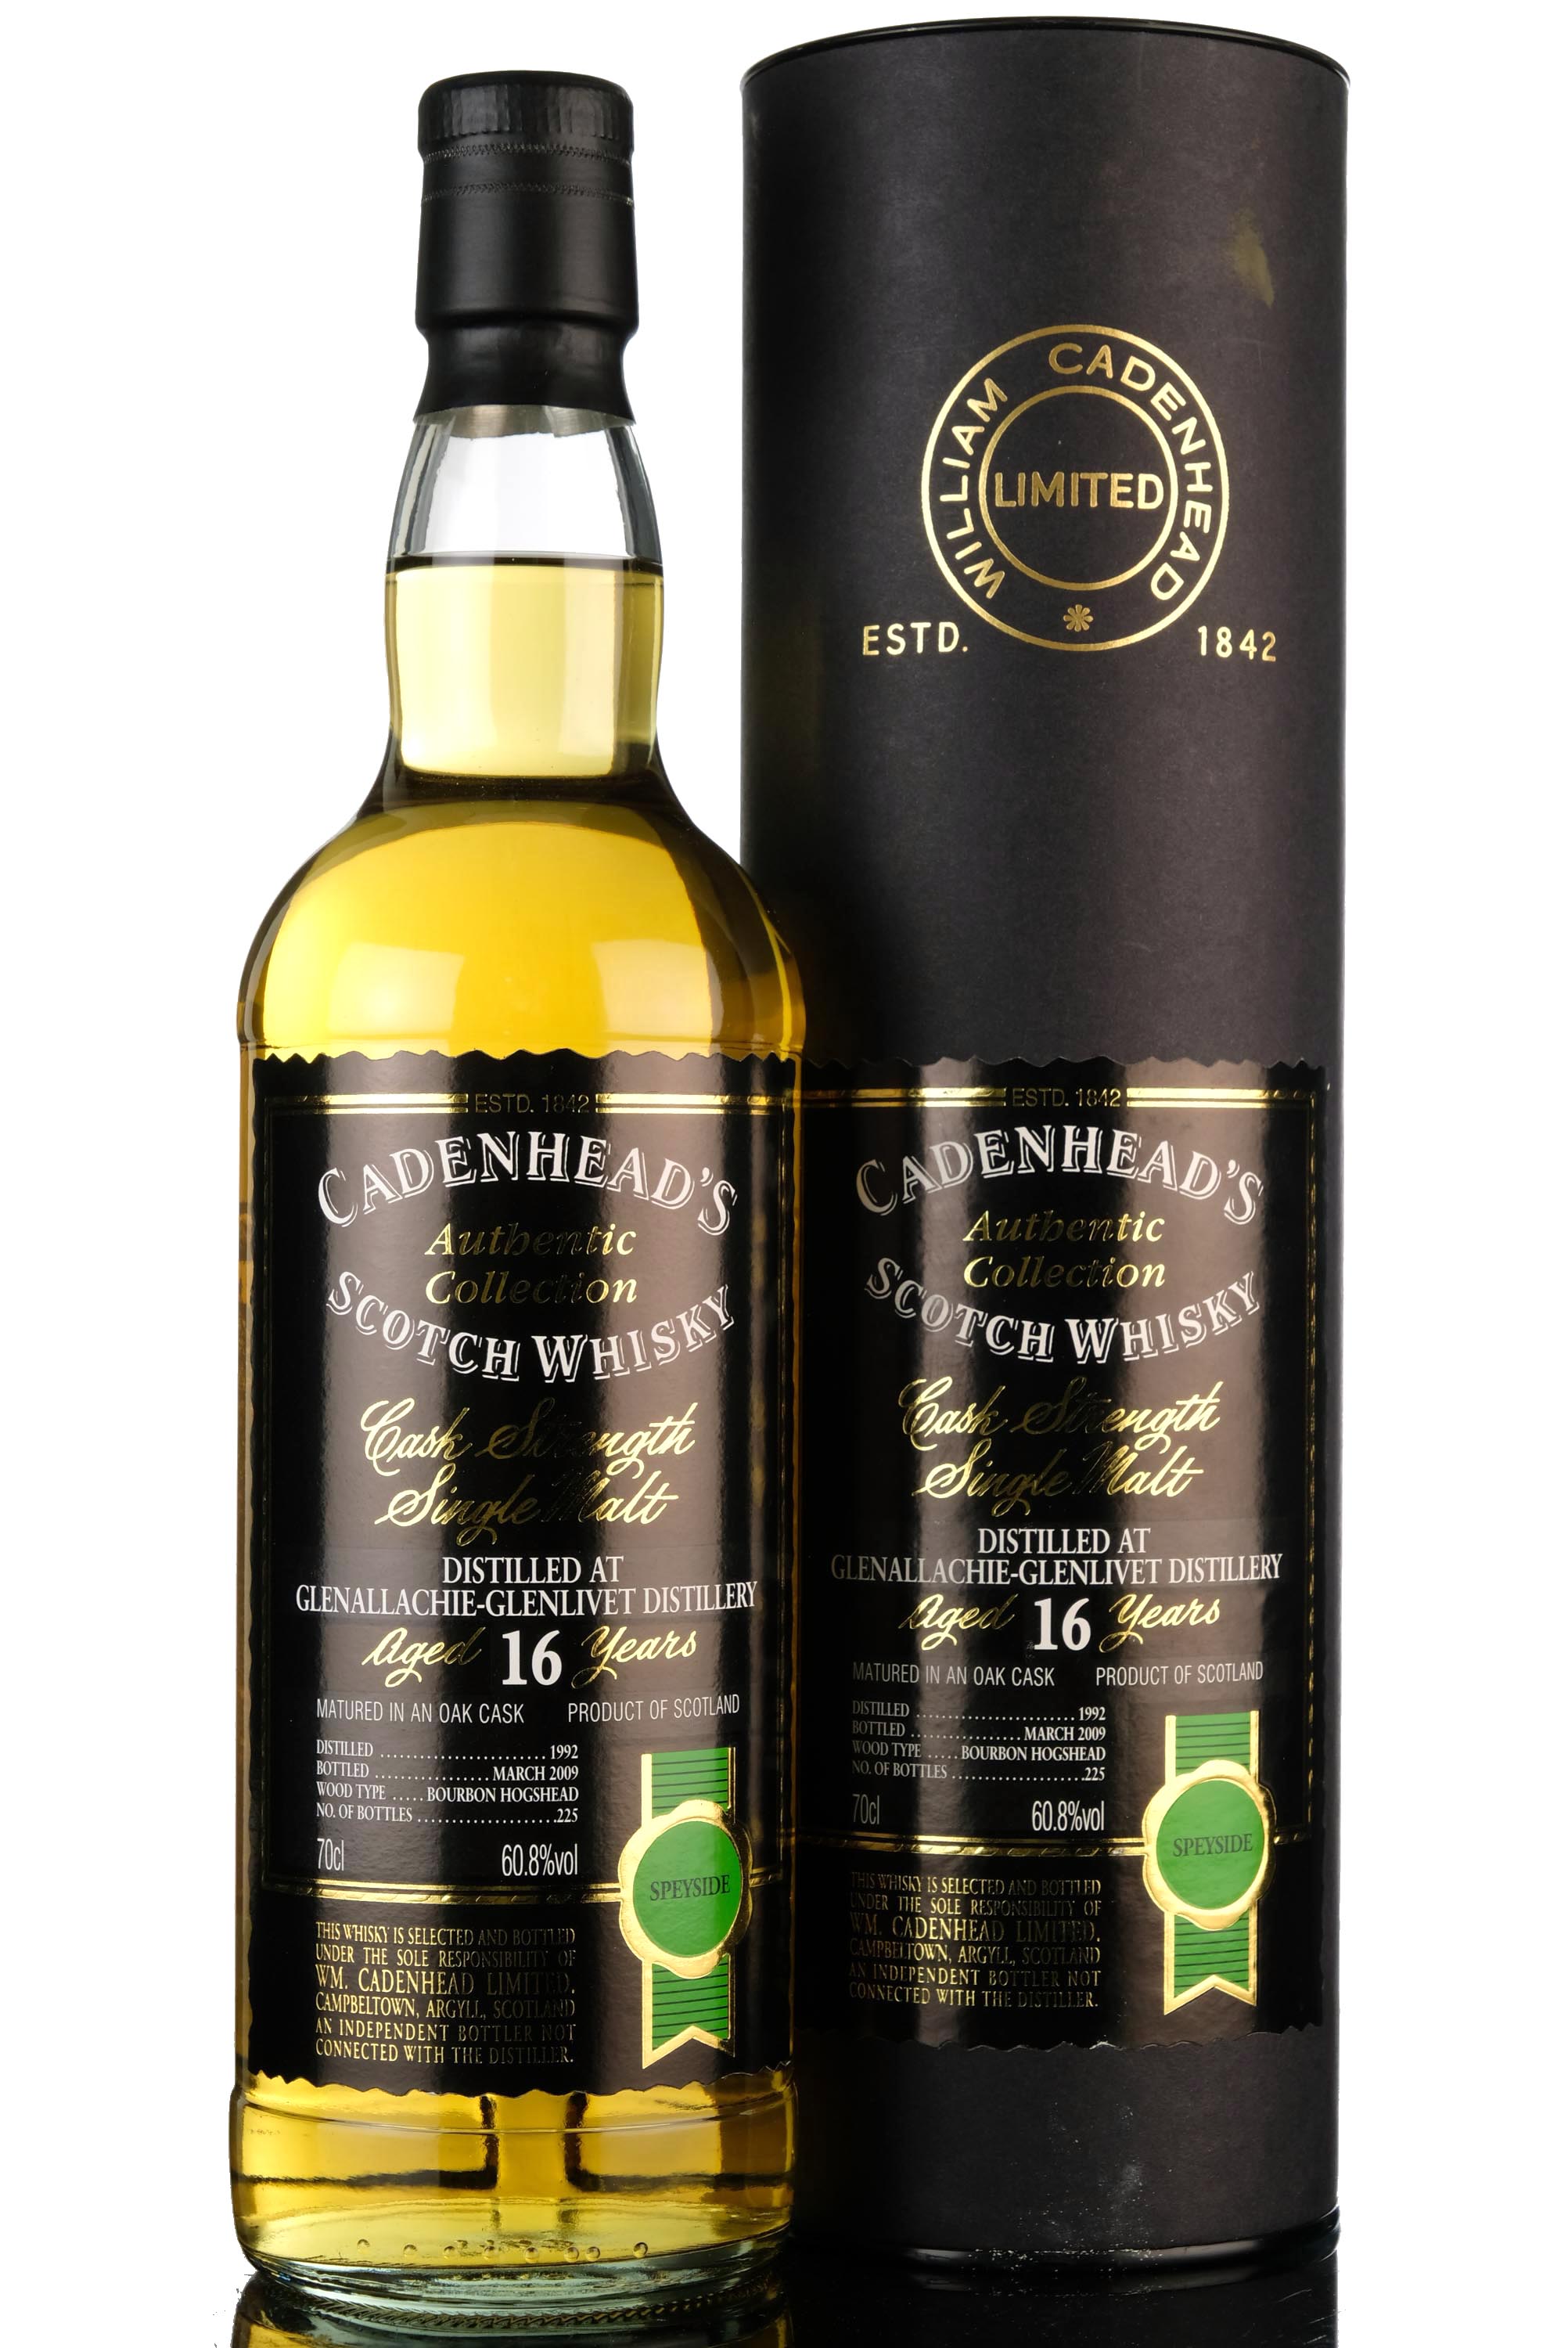 Glenallachie-Glenlivet 1992-2009 - 16 Year Old - Cadenheads Authentic Collection